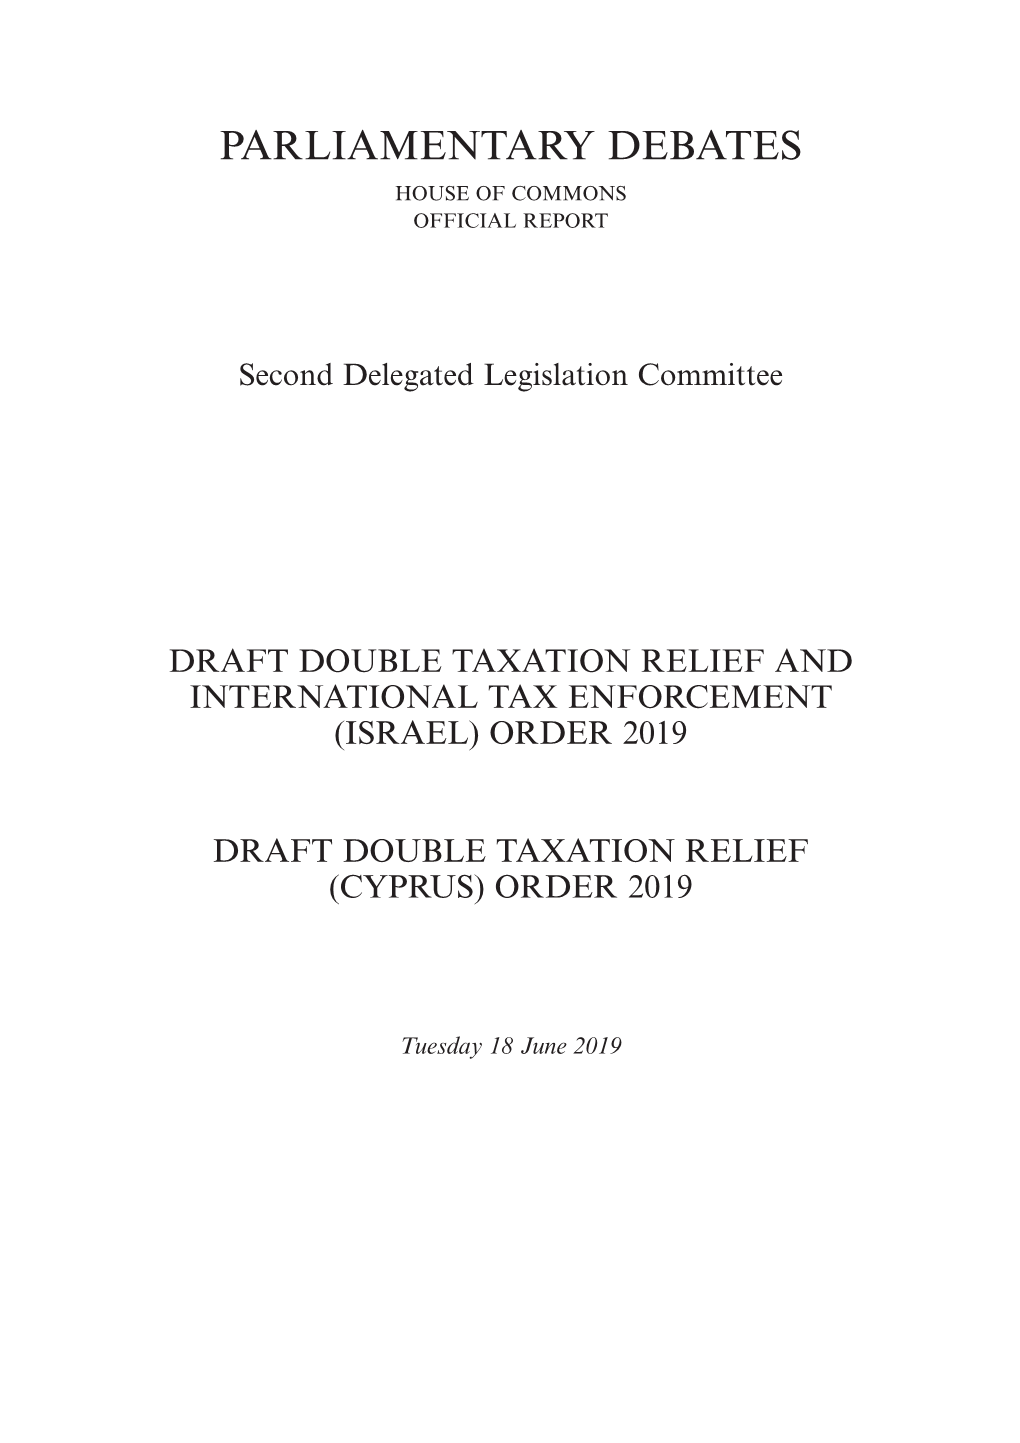 Order 2019 Draft Double Taxation Relief (Cyprus